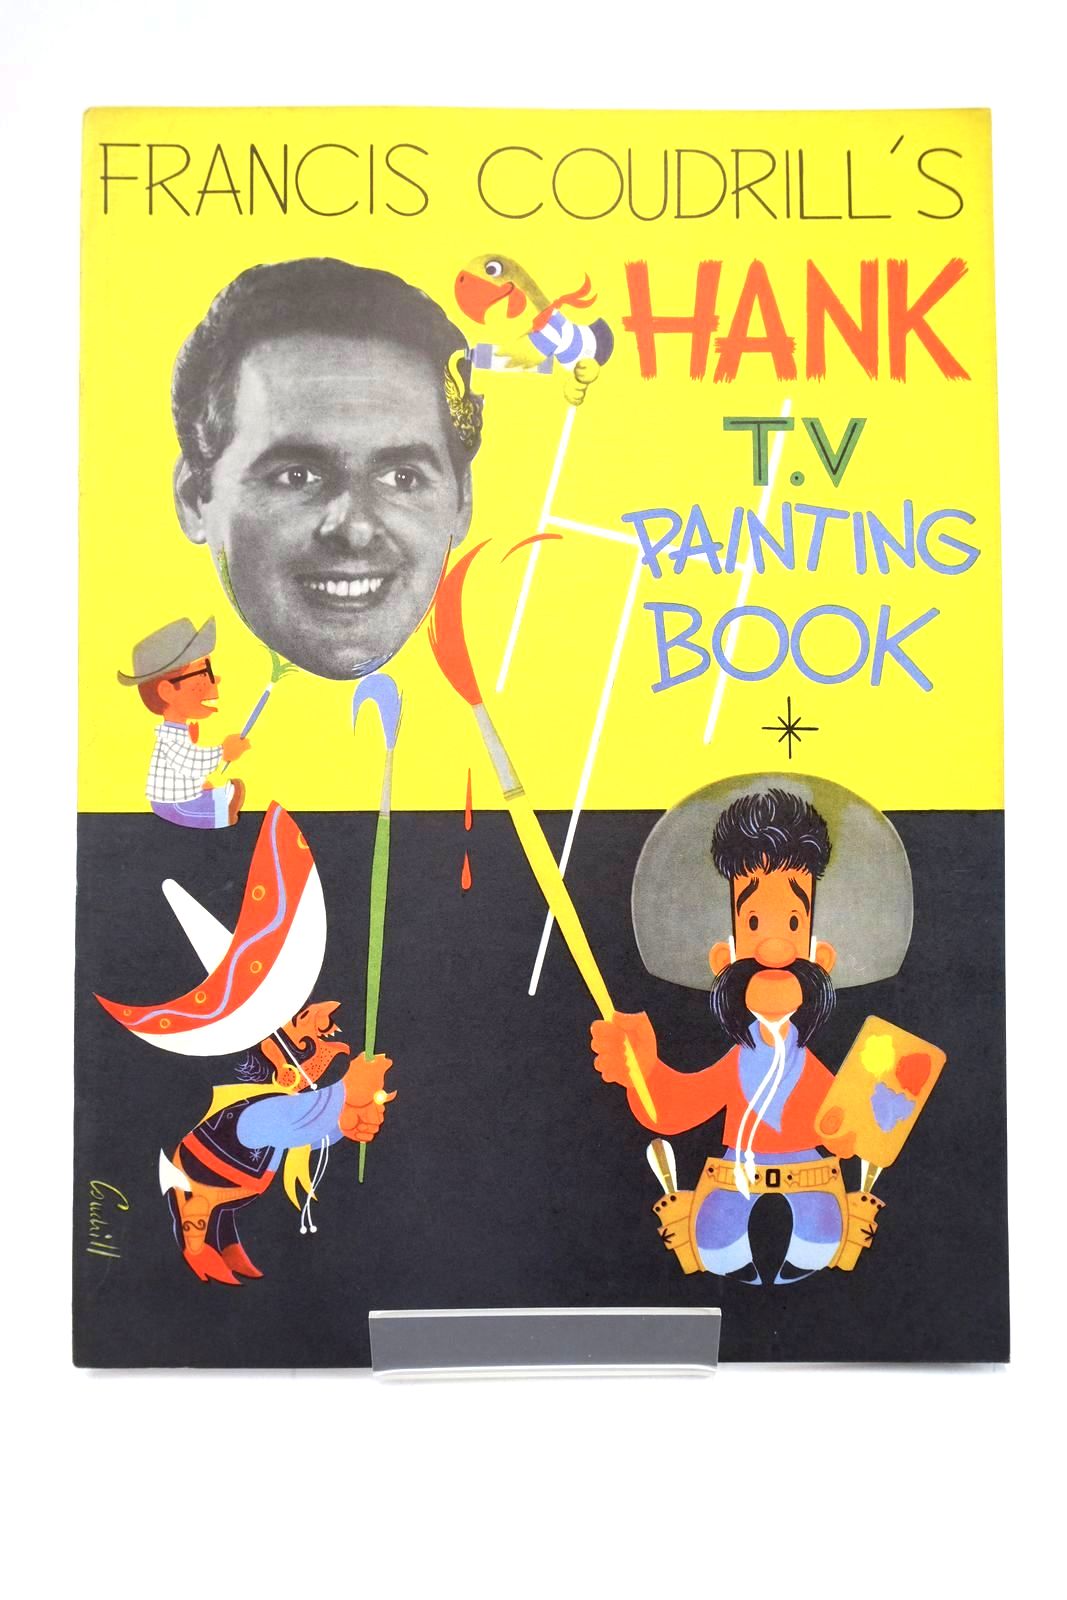 Photo of FRANCIS COUDRILL'S HANK T.V PAINTING BOOK illustrated by Coudrill, Francis published by Publicity Products Limited (STOCK CODE: 1325007)  for sale by Stella & Rose's Books